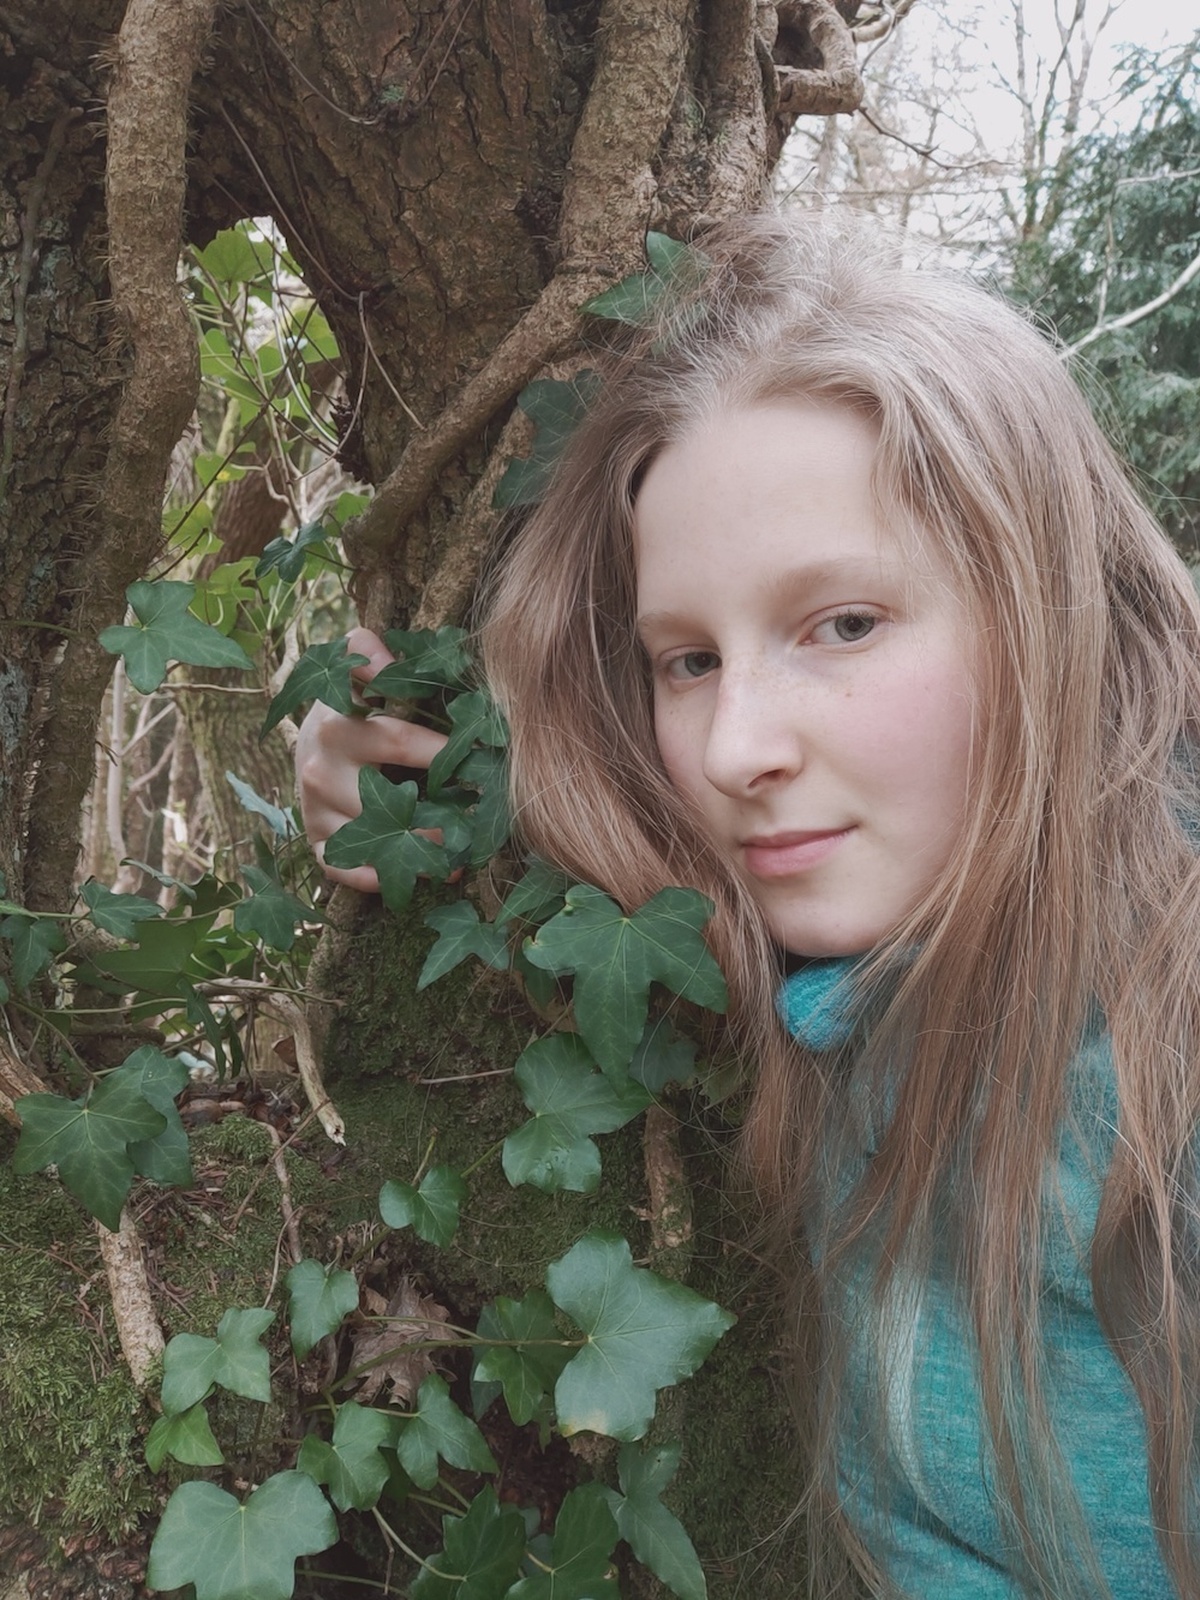 Young storyteller Ffion Phillips, looks towards us, leaning against and holding on to a tree trunk covered in ivy